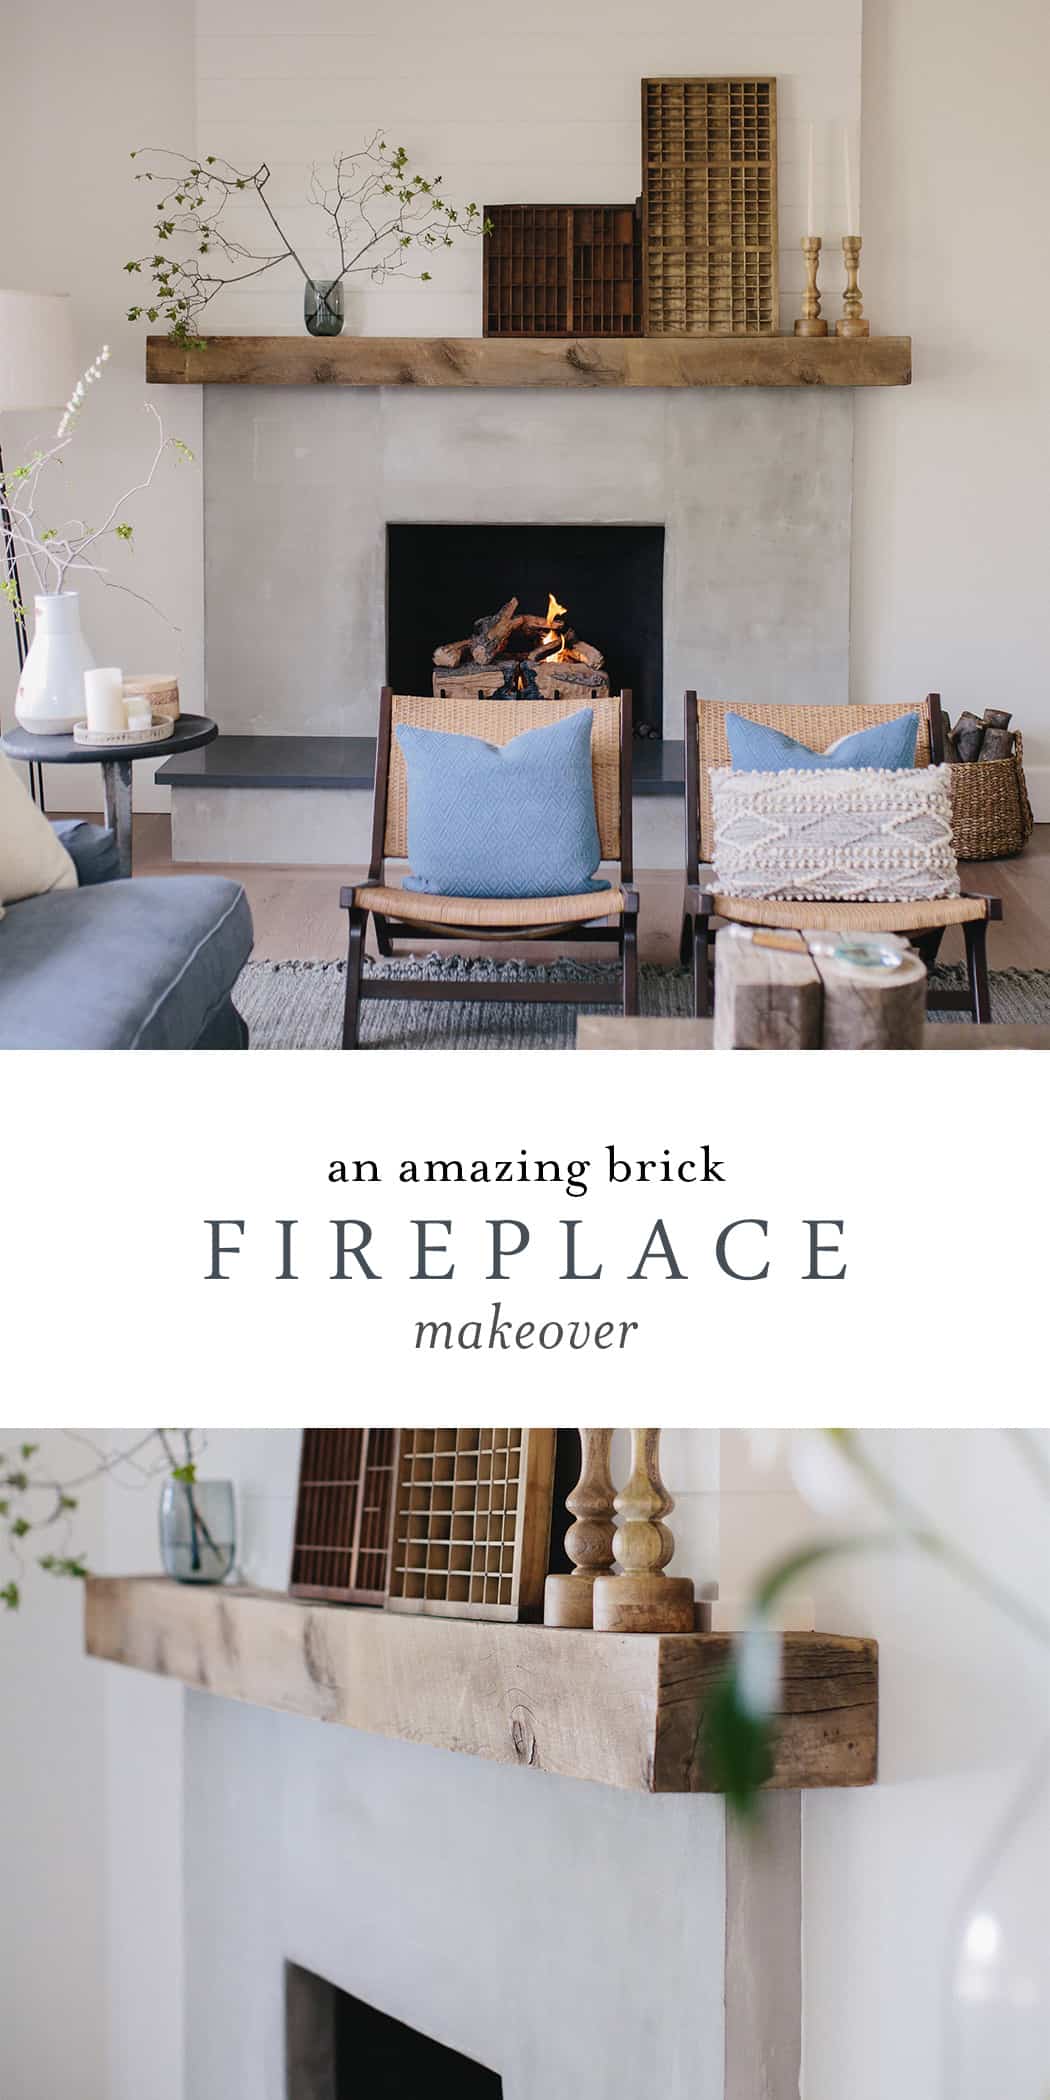 Brick Fireplace Update Using Cement And, How To Put Tile On A Brick Fireplace